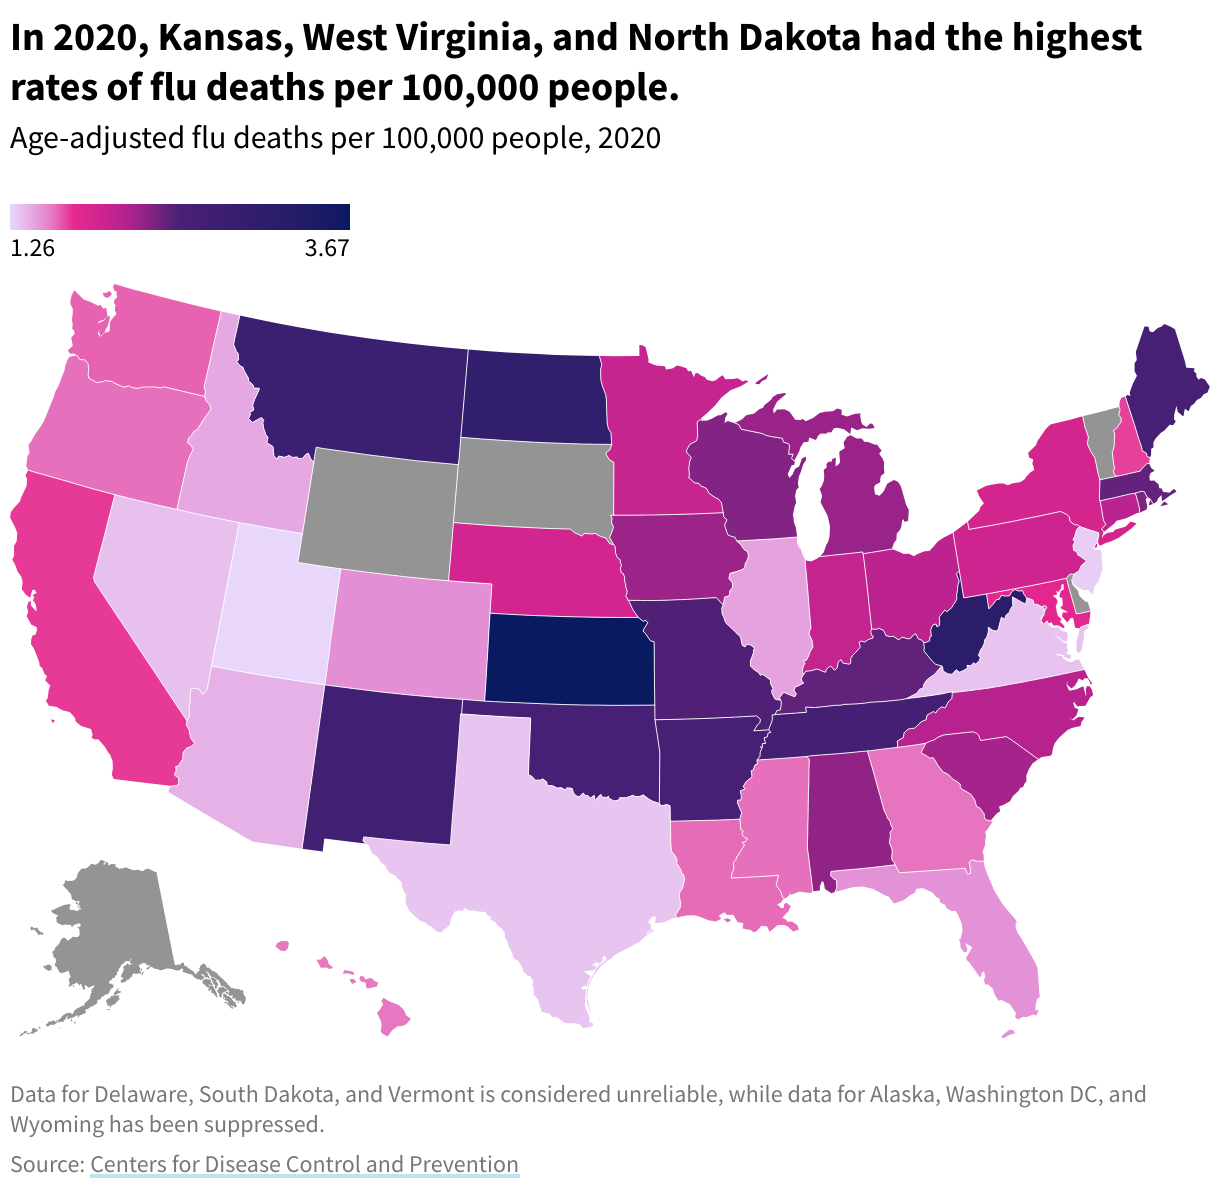 A map of US state displaying the number of age-adjusted flu deaths per 100,000 people.